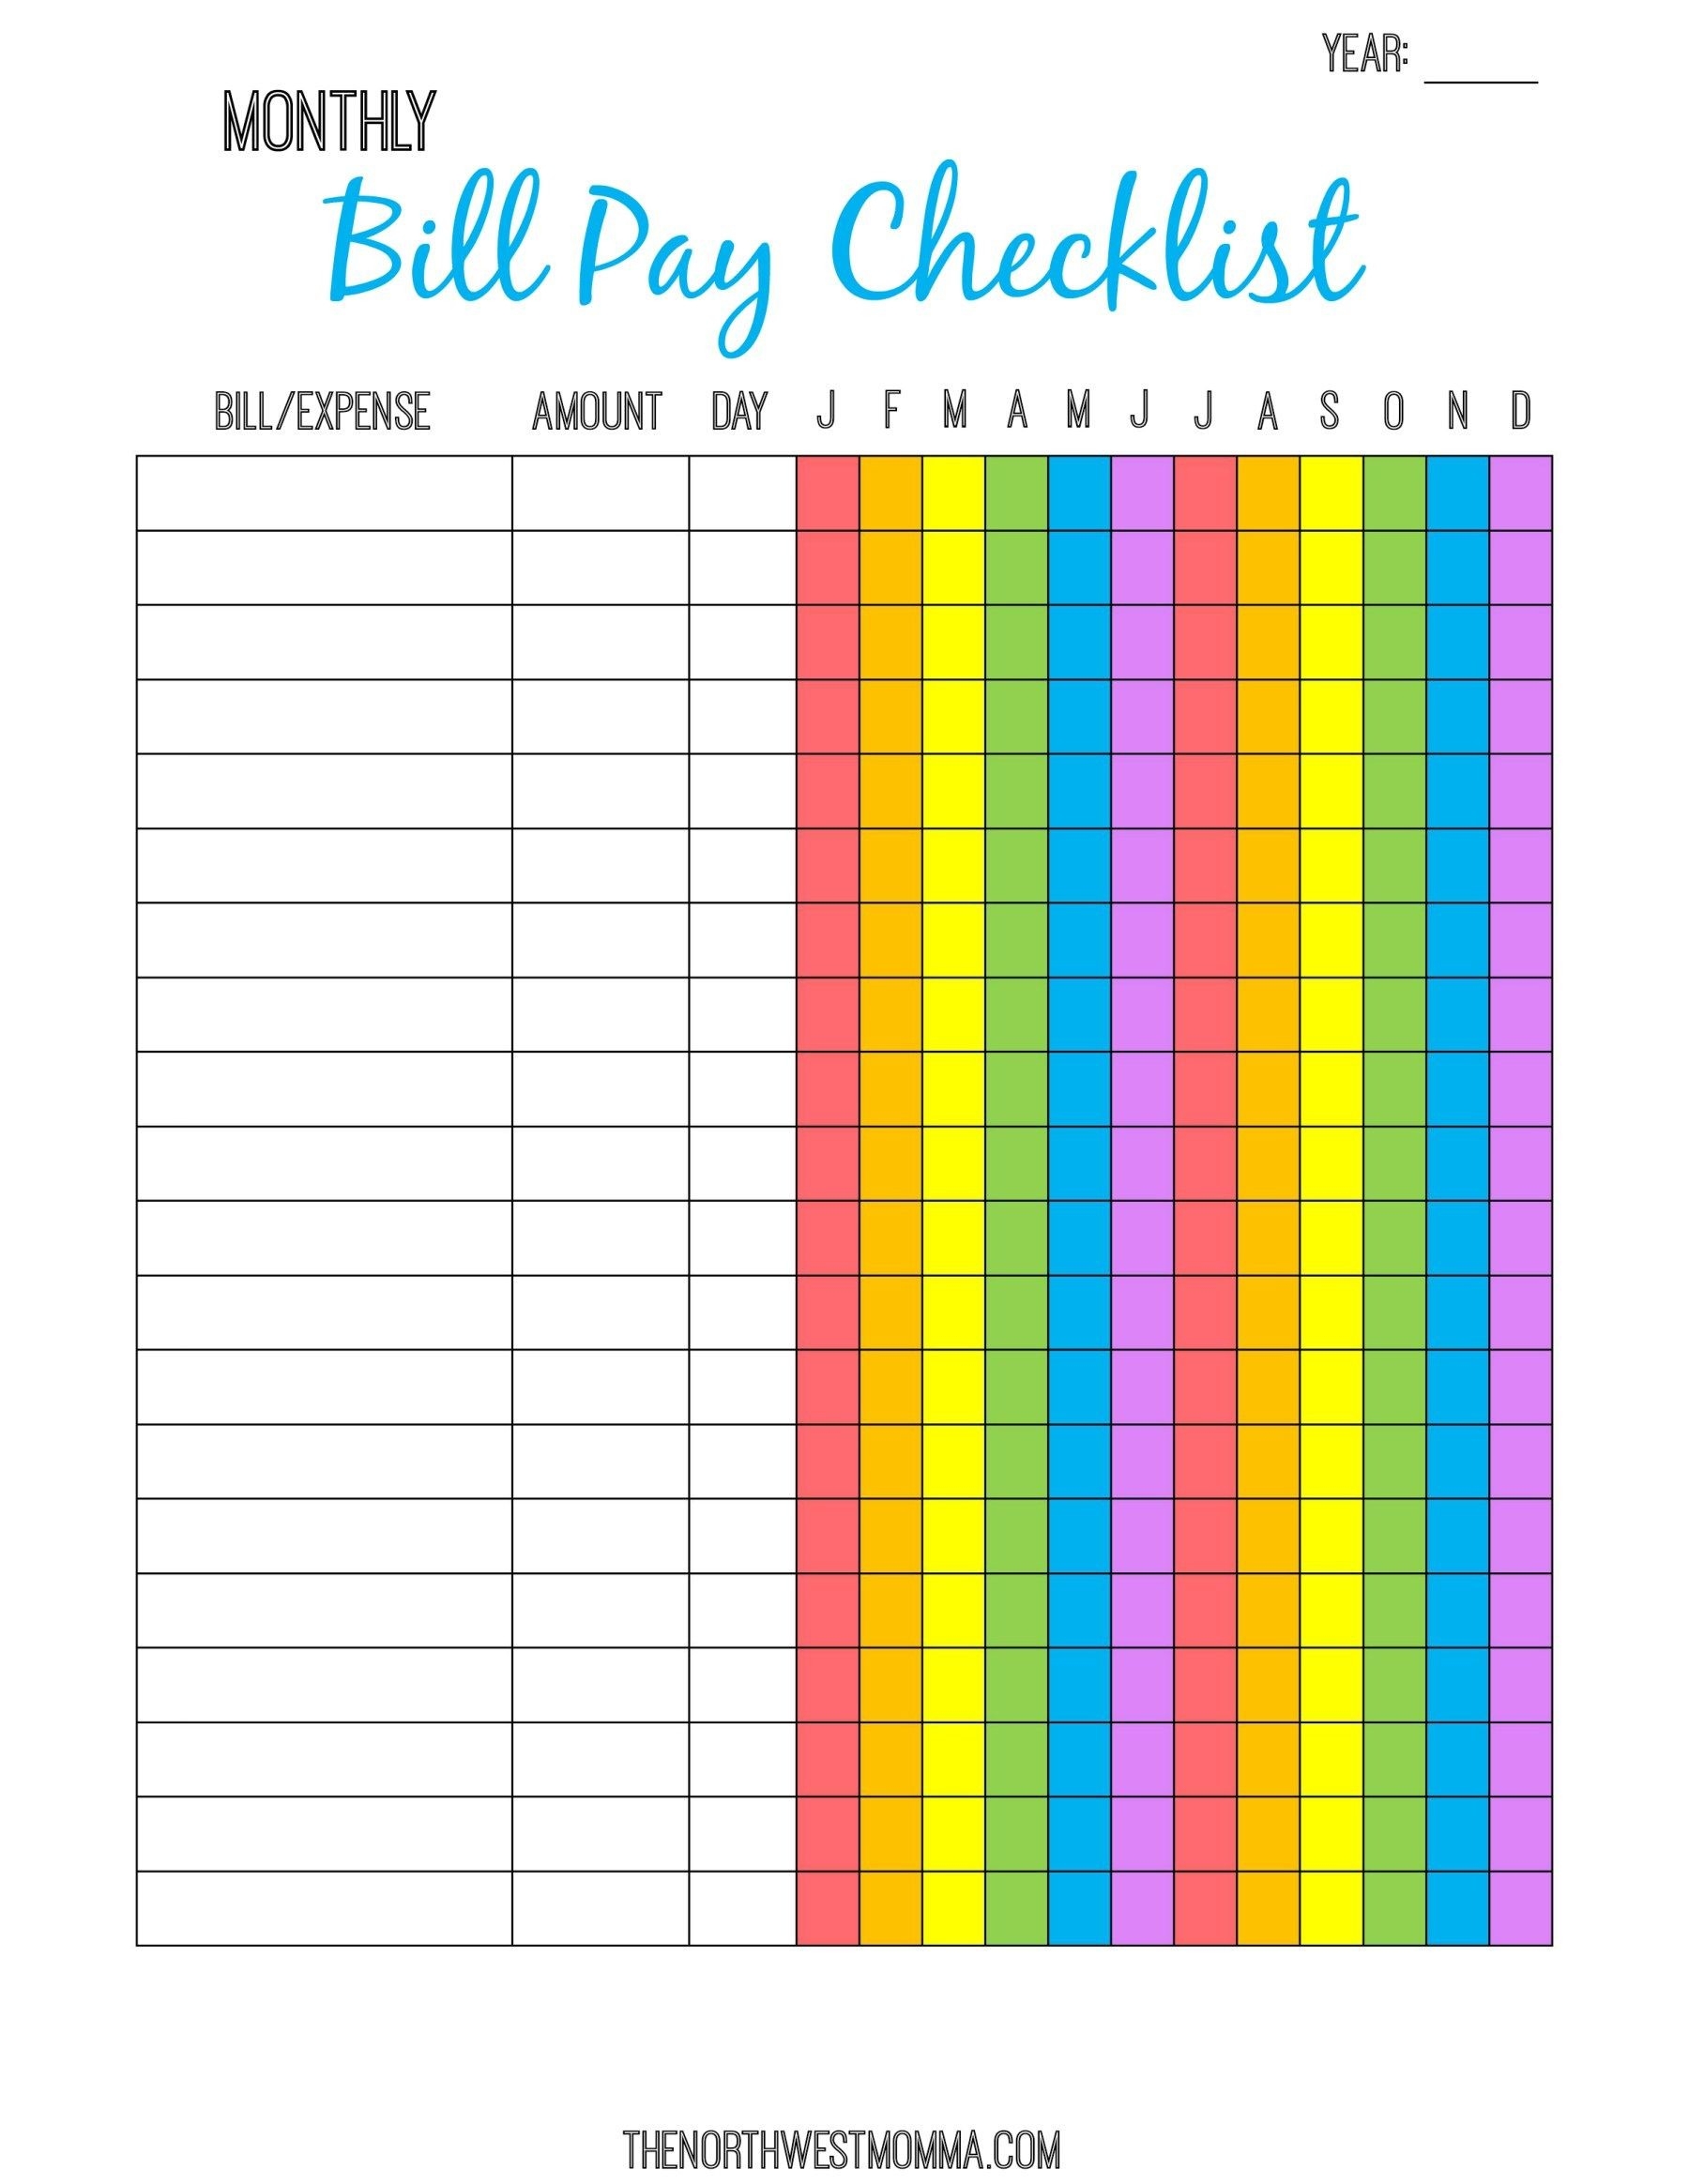 Monthly Bill Pay Checklist- Free Printable! | Organizing  Free Monthly Payment Sheet